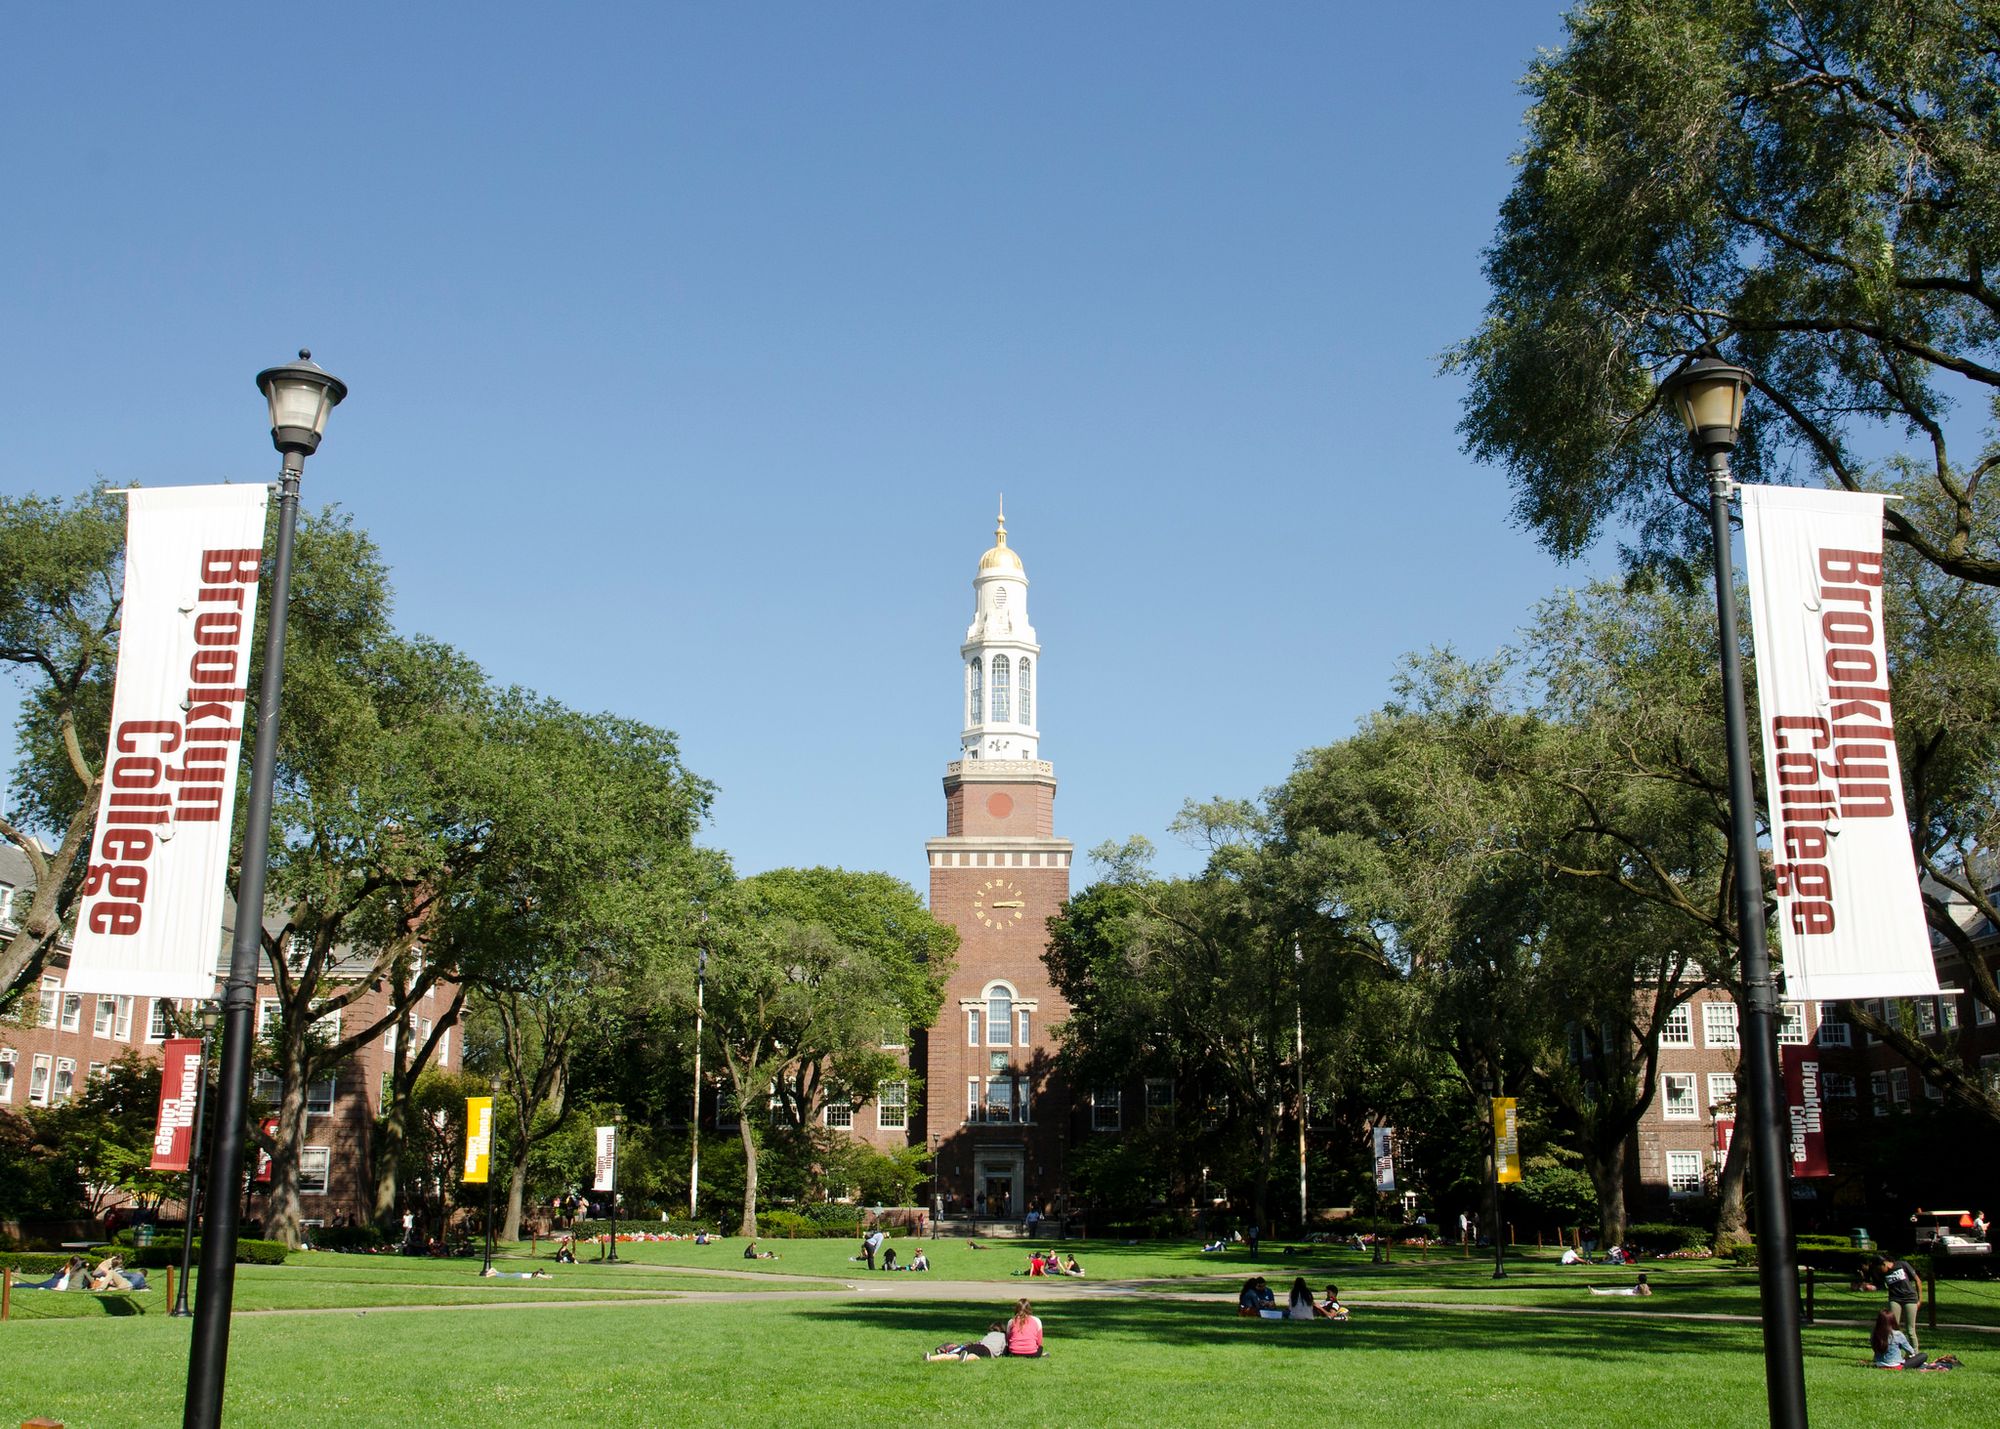 Updated: Brooklyn College Named One Of The Best Colleges In The United States By The Princeton Review